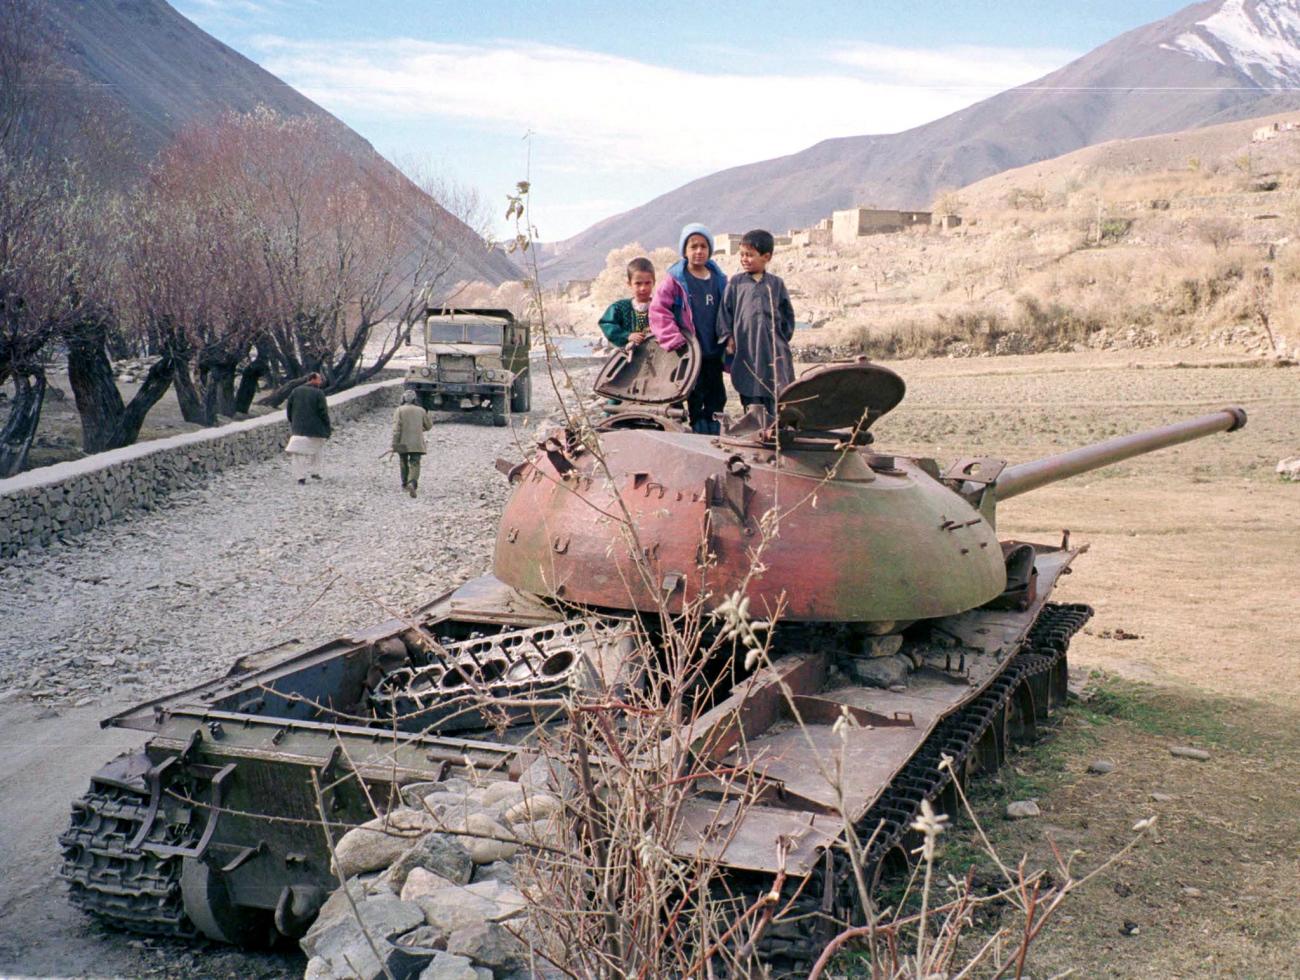 Afghan children in the Panjsher valley December 9 play on a gutted Russian tank which was destroyed by mujahideen guerrillas during the Soviet invasion of Afghanistan in 1978. Thousands fled their homes north of Kabul for the sanctuary of the Panjsher when the Taleban launched a summer offensive to crush Ahmad Shah Masood, their last major opponent.